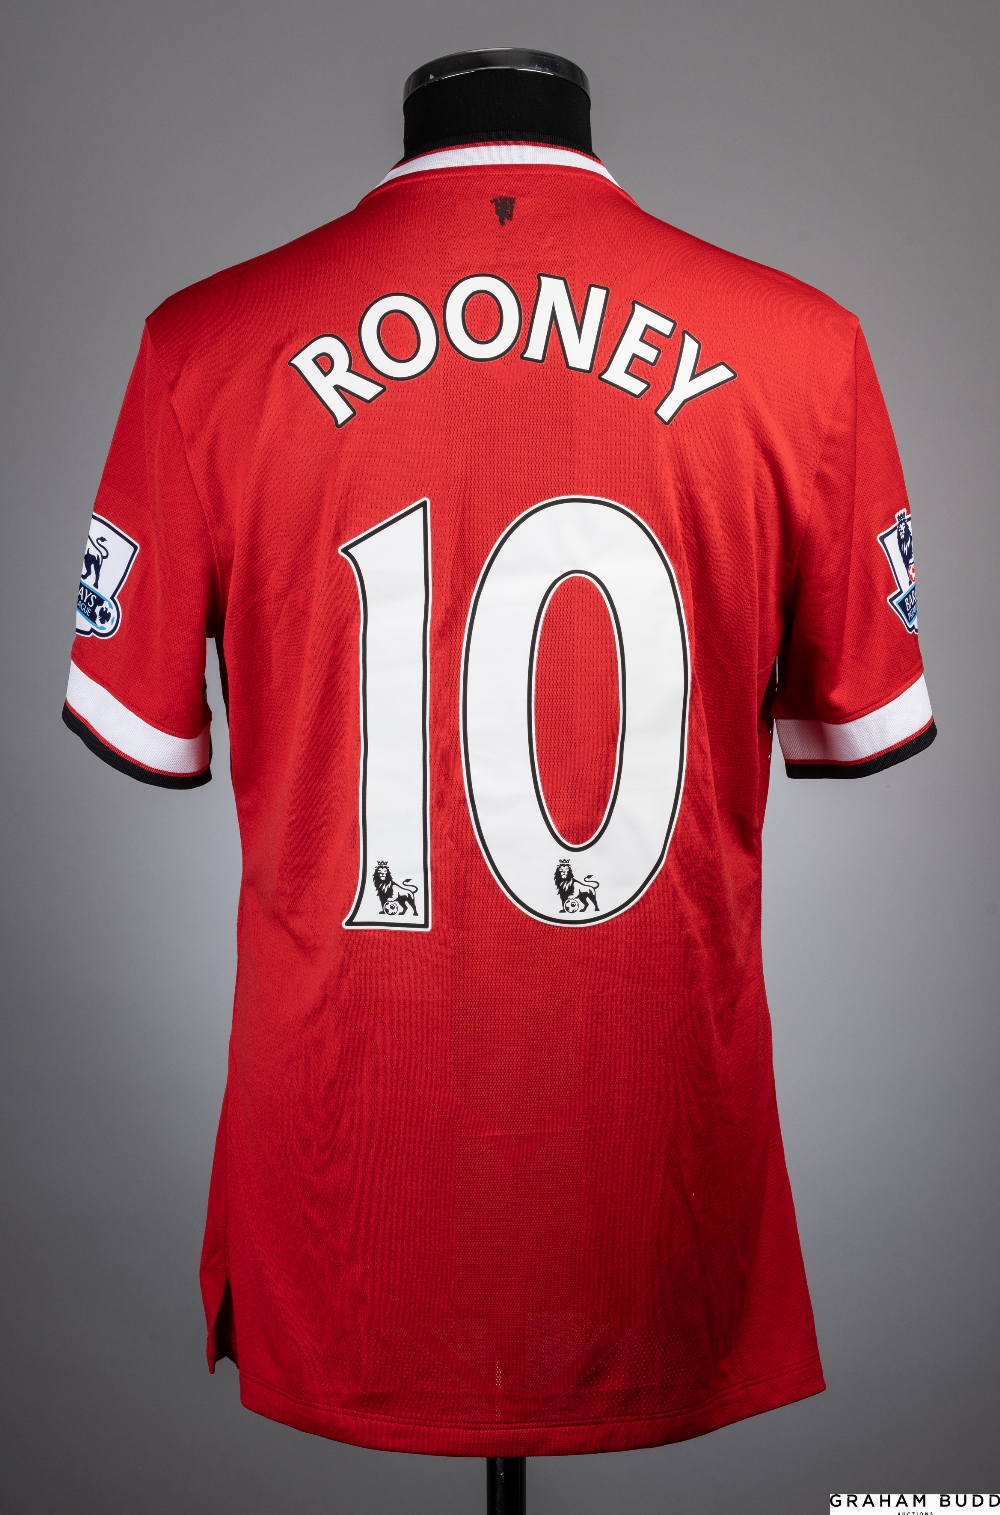 Wayne Rooney red No.10 Manchester United match issued short-sleeved shirt - Image 2 of 2